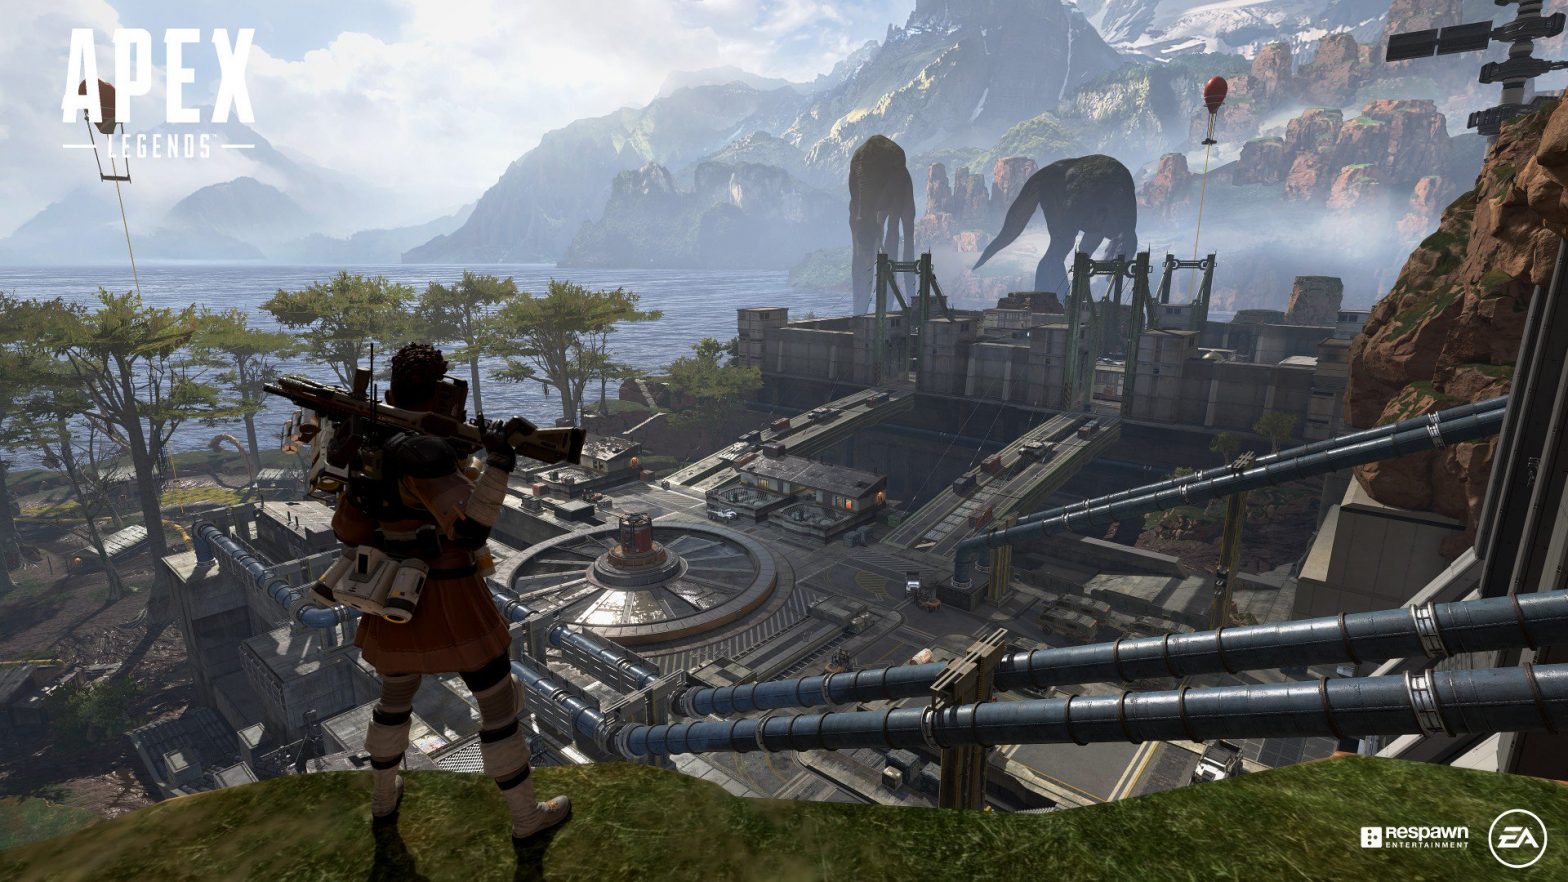 Apex Legends : Free to Play Battle Royal Shooter from the makers of Titan Fall 2